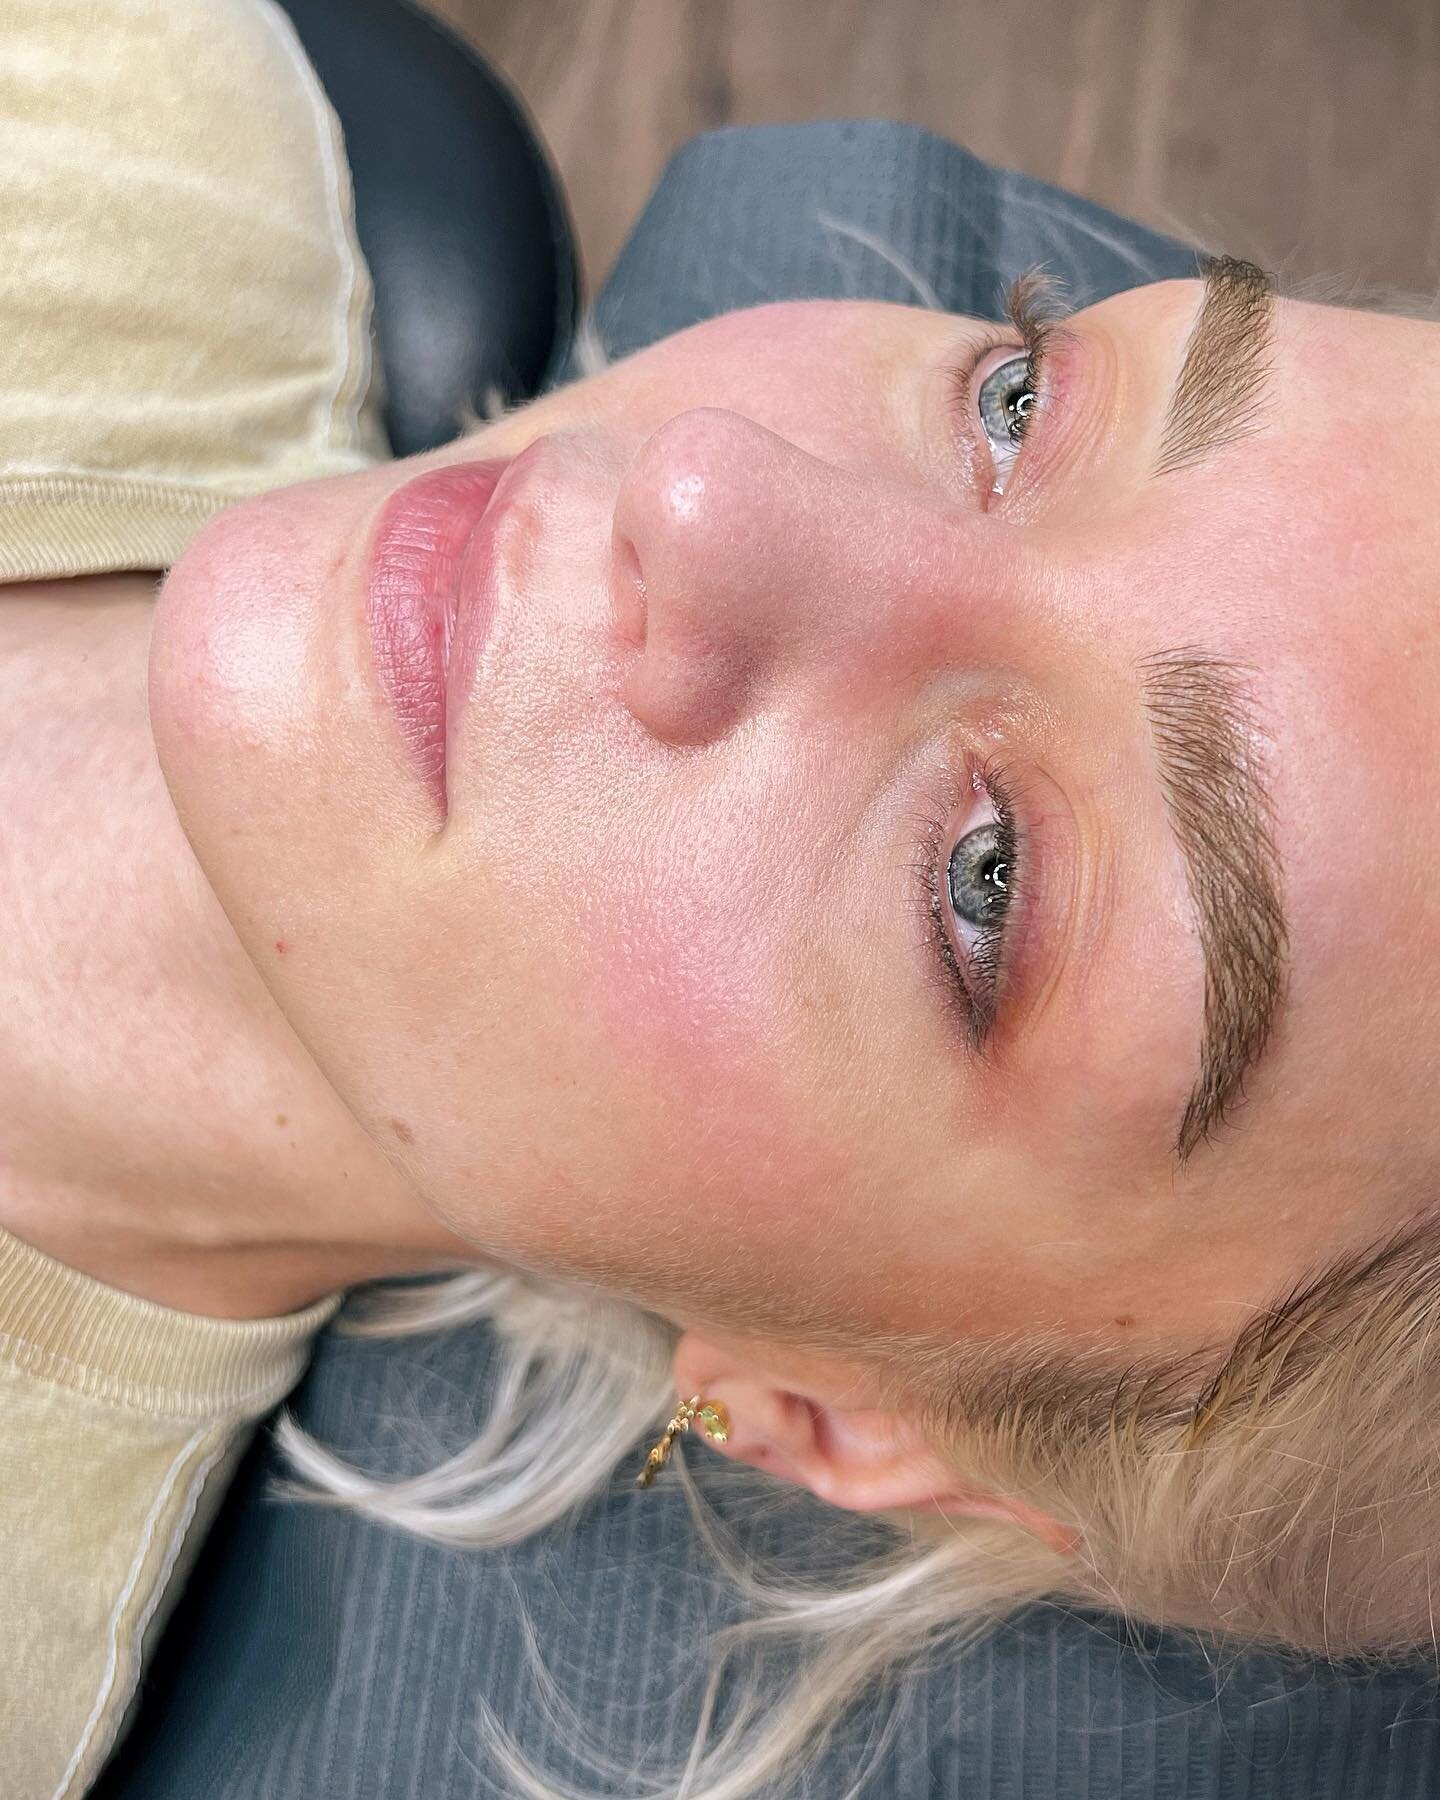 Covered up some old Permanent Makeup here. This is fresh after her touch up session.🖤
.
#ashevillemicroblading #knoxvillemicroblading #johnsoncitymicroblading